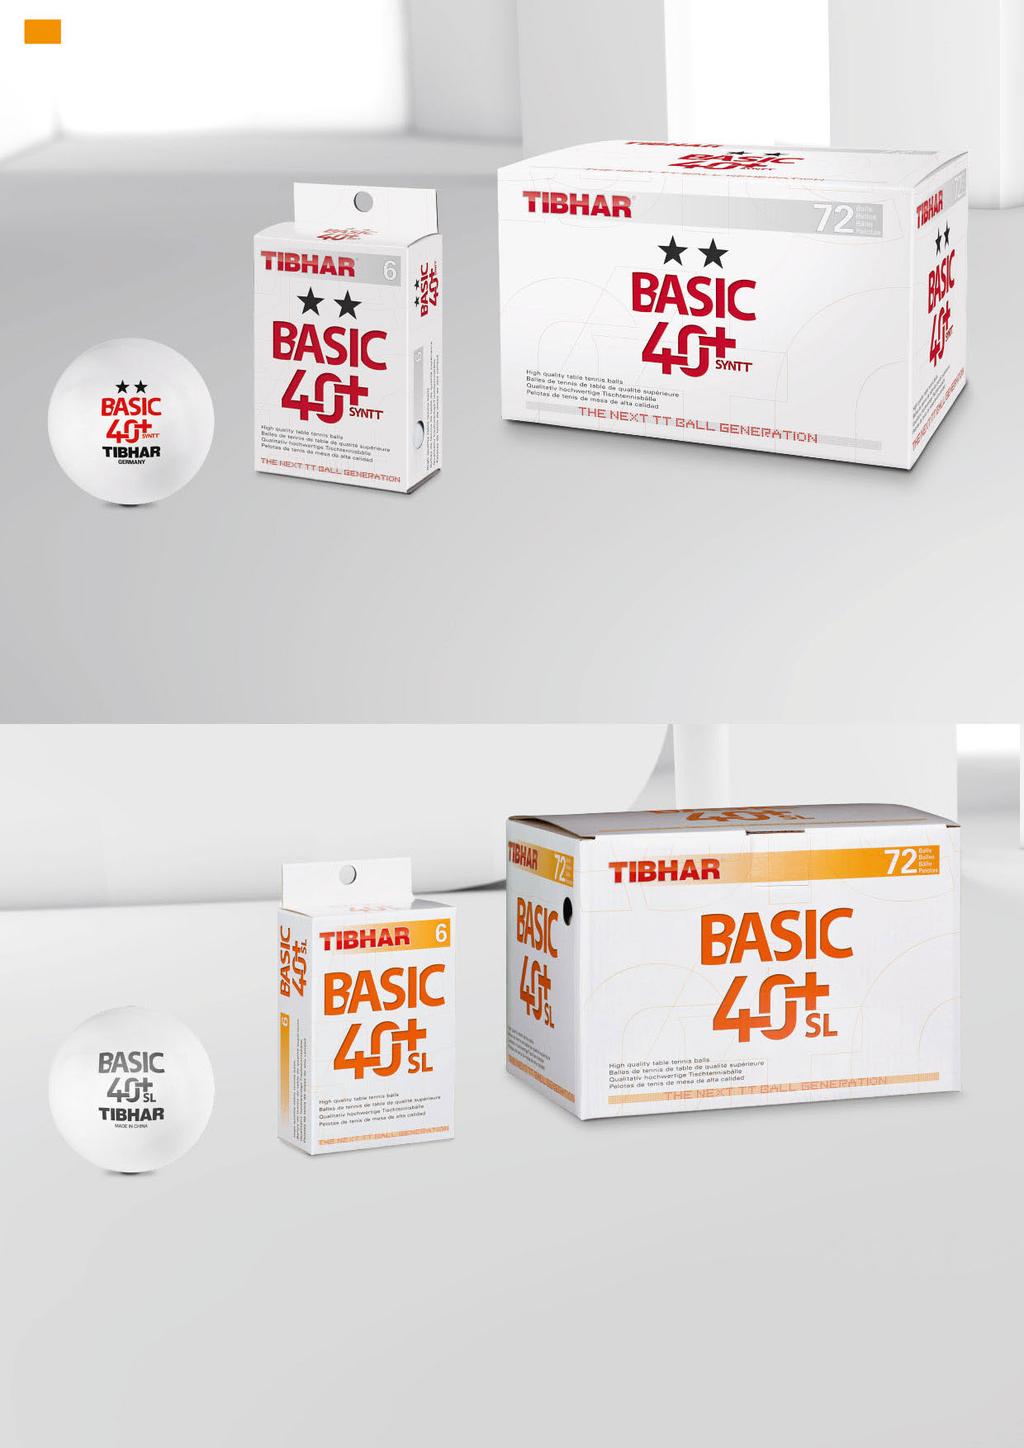 52 BASIC BALLS BASIC 40+ SYNTT PACK OF 6 High-quality, celluloid-free tt-ball Precise and utmost regular ball bounce Available in white BASIC 40+ SYNTT PACK OF 72 High-quality,